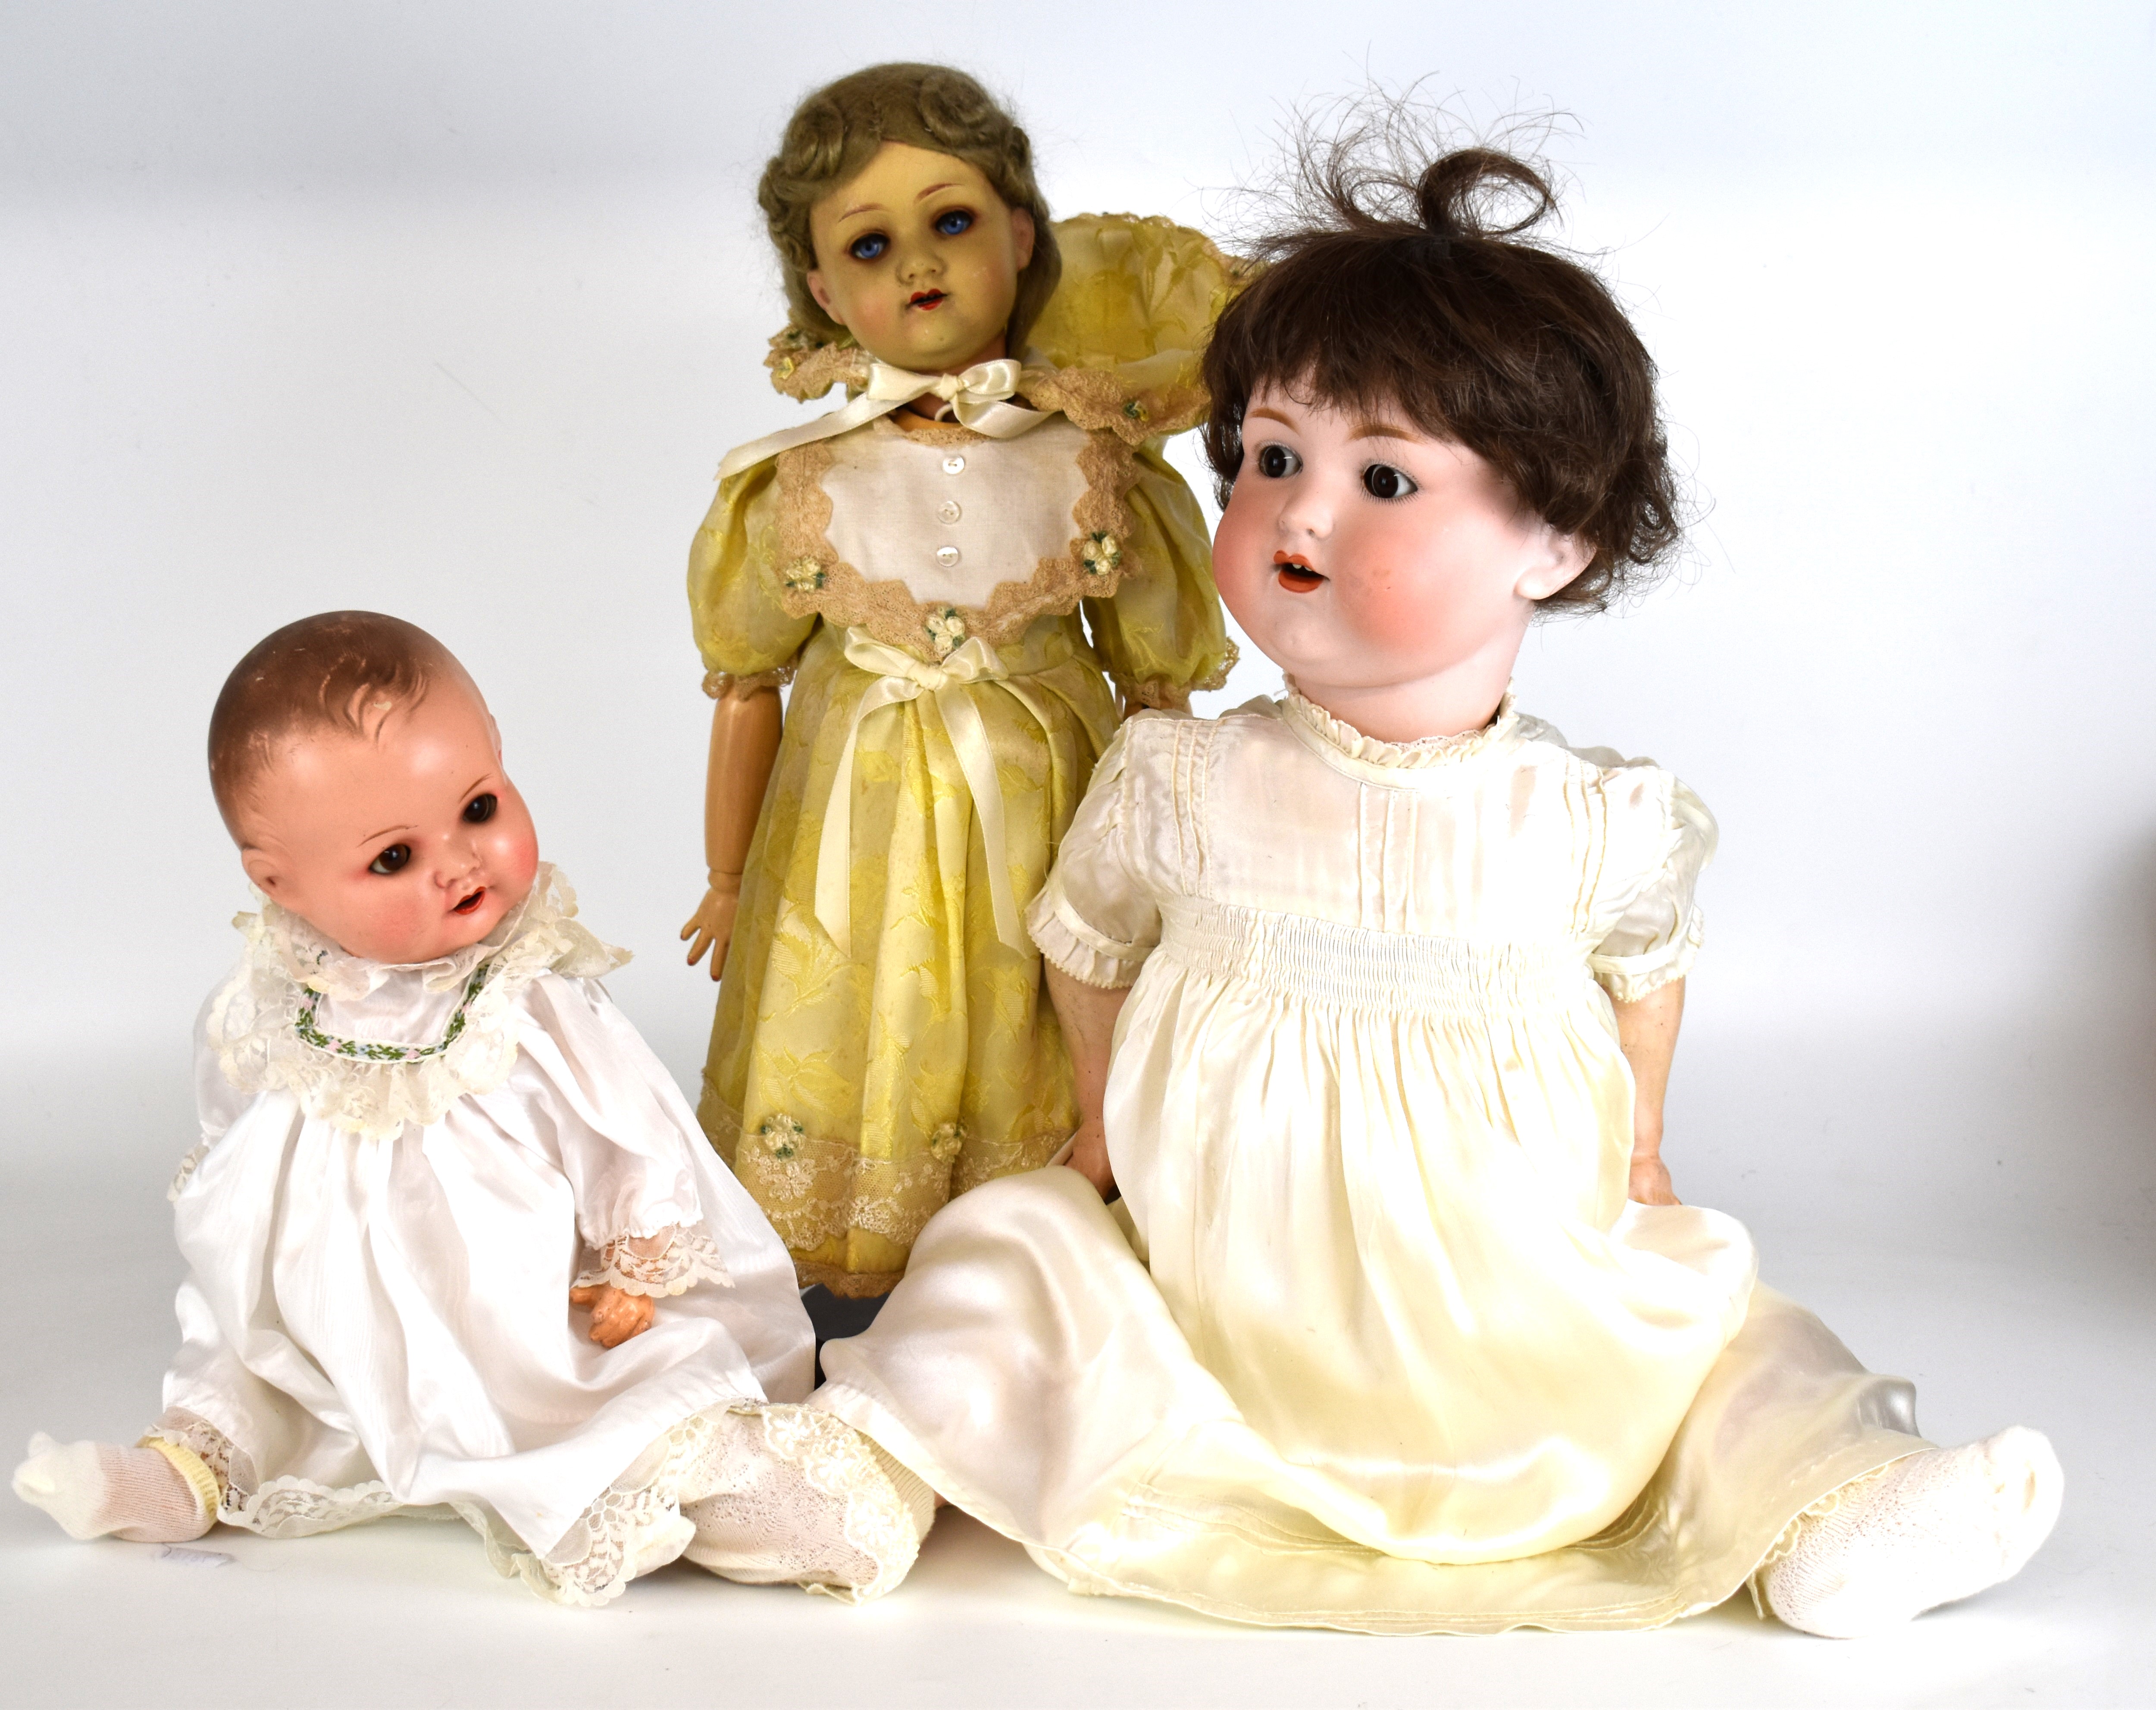 Three Armand Marseille bisque headed dolls with weighted eyes, articulated limbs, painted features